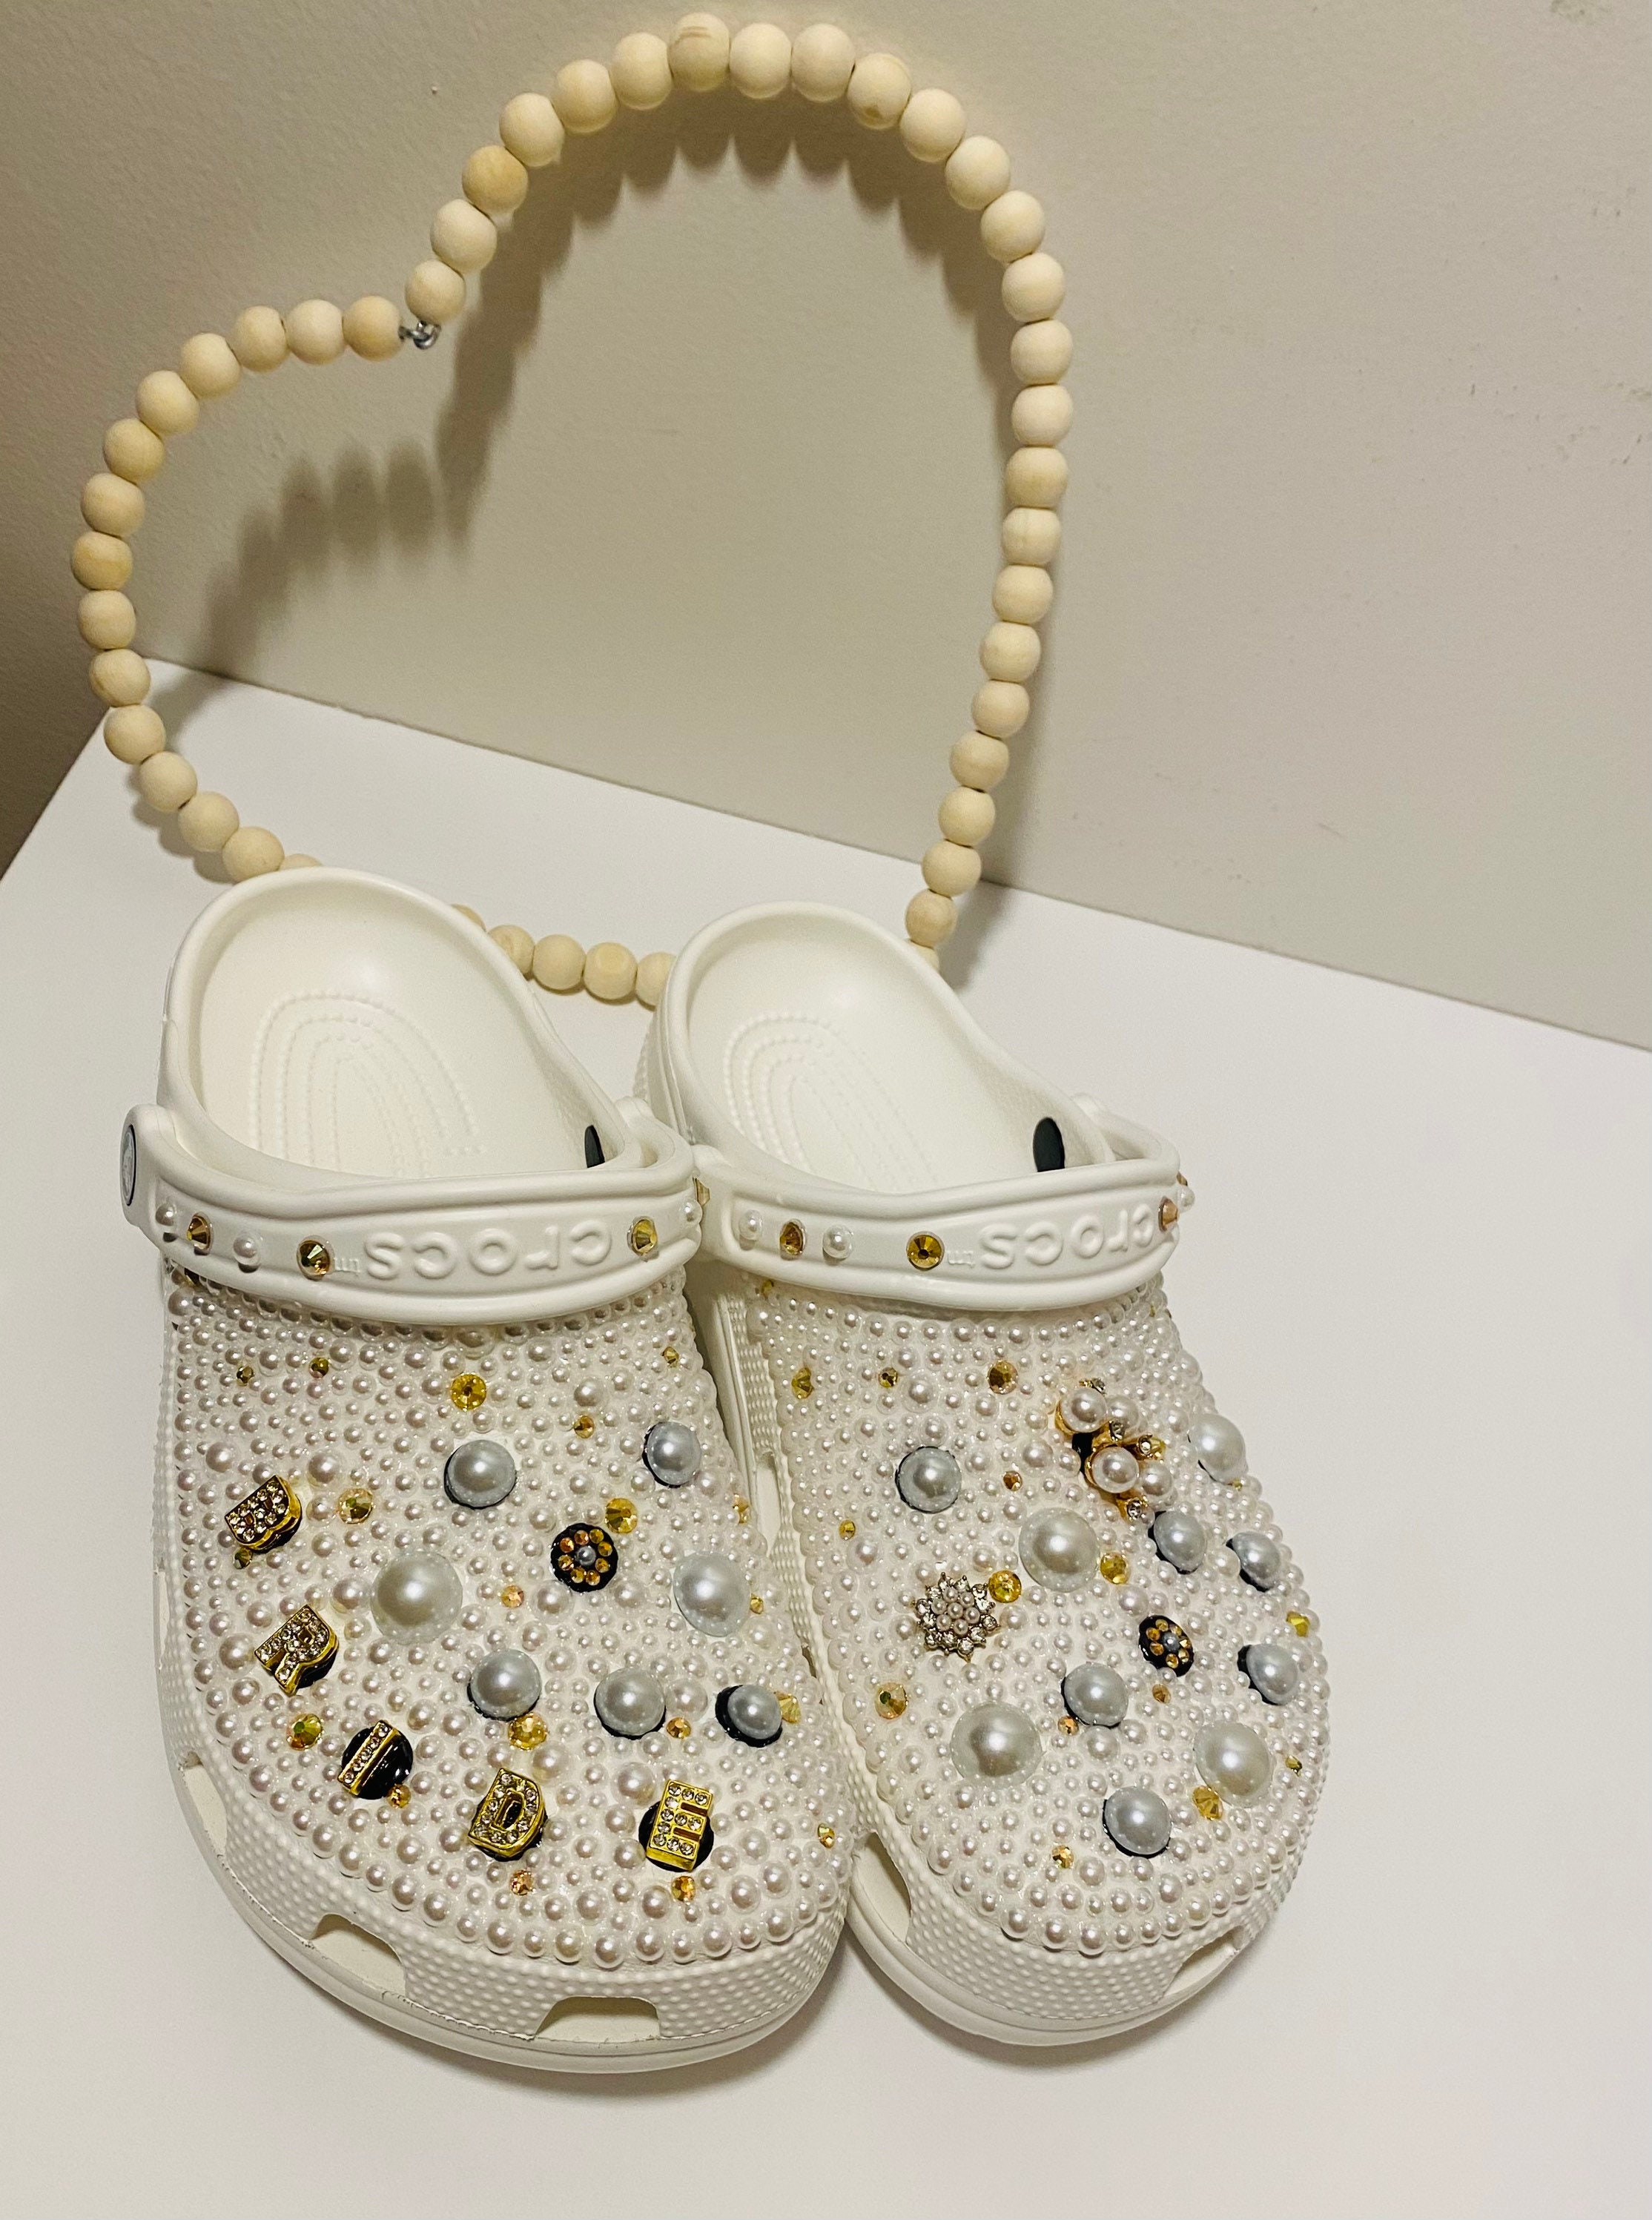 CUSTOM MINI AND MOMMY BLING & PEARLS INSPIRED CROCS SET — The